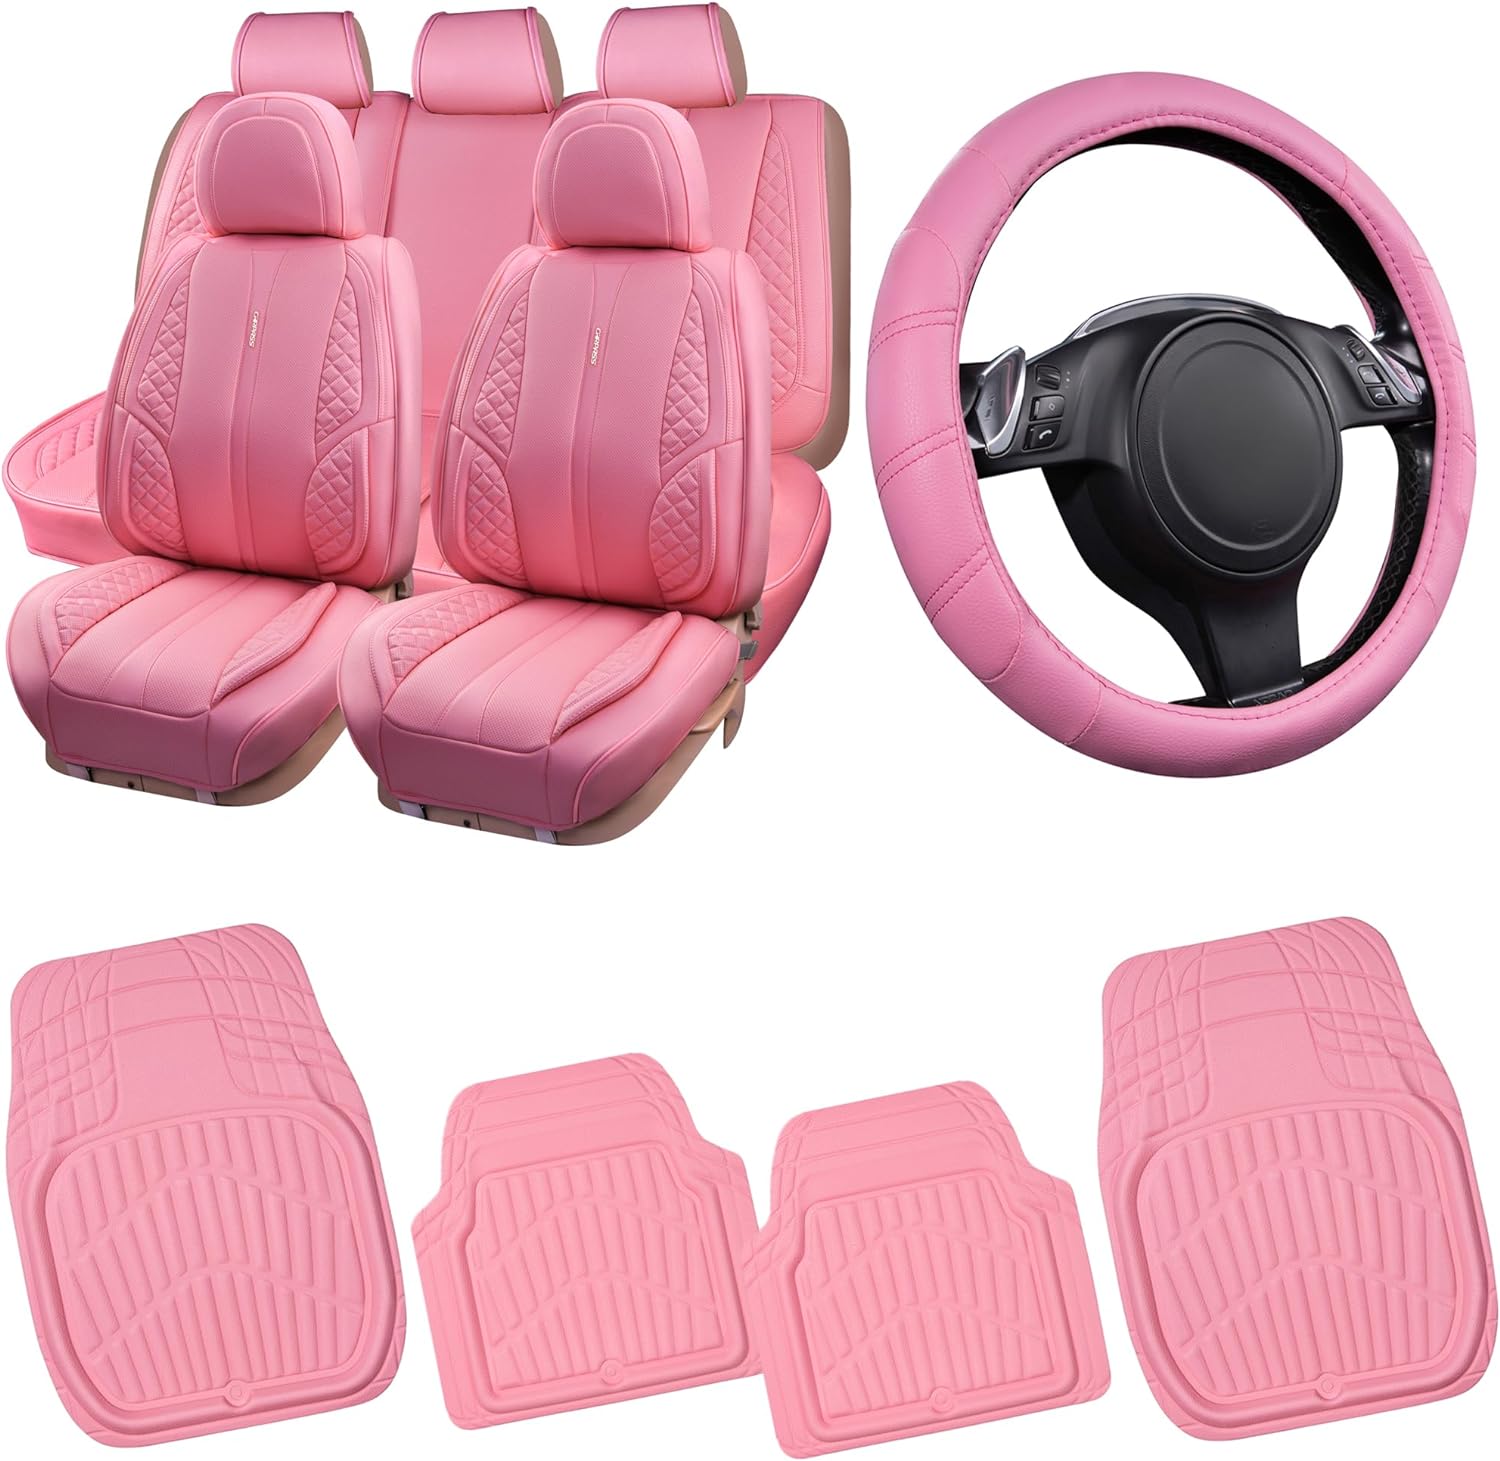 CAR PASS Barbie Pink Nappa Waterproof Leather Car Seat Covers Full Sets Cushion Breathable Protector Universal Fit for Car Sedan SUV Pickup Truck (Pink)